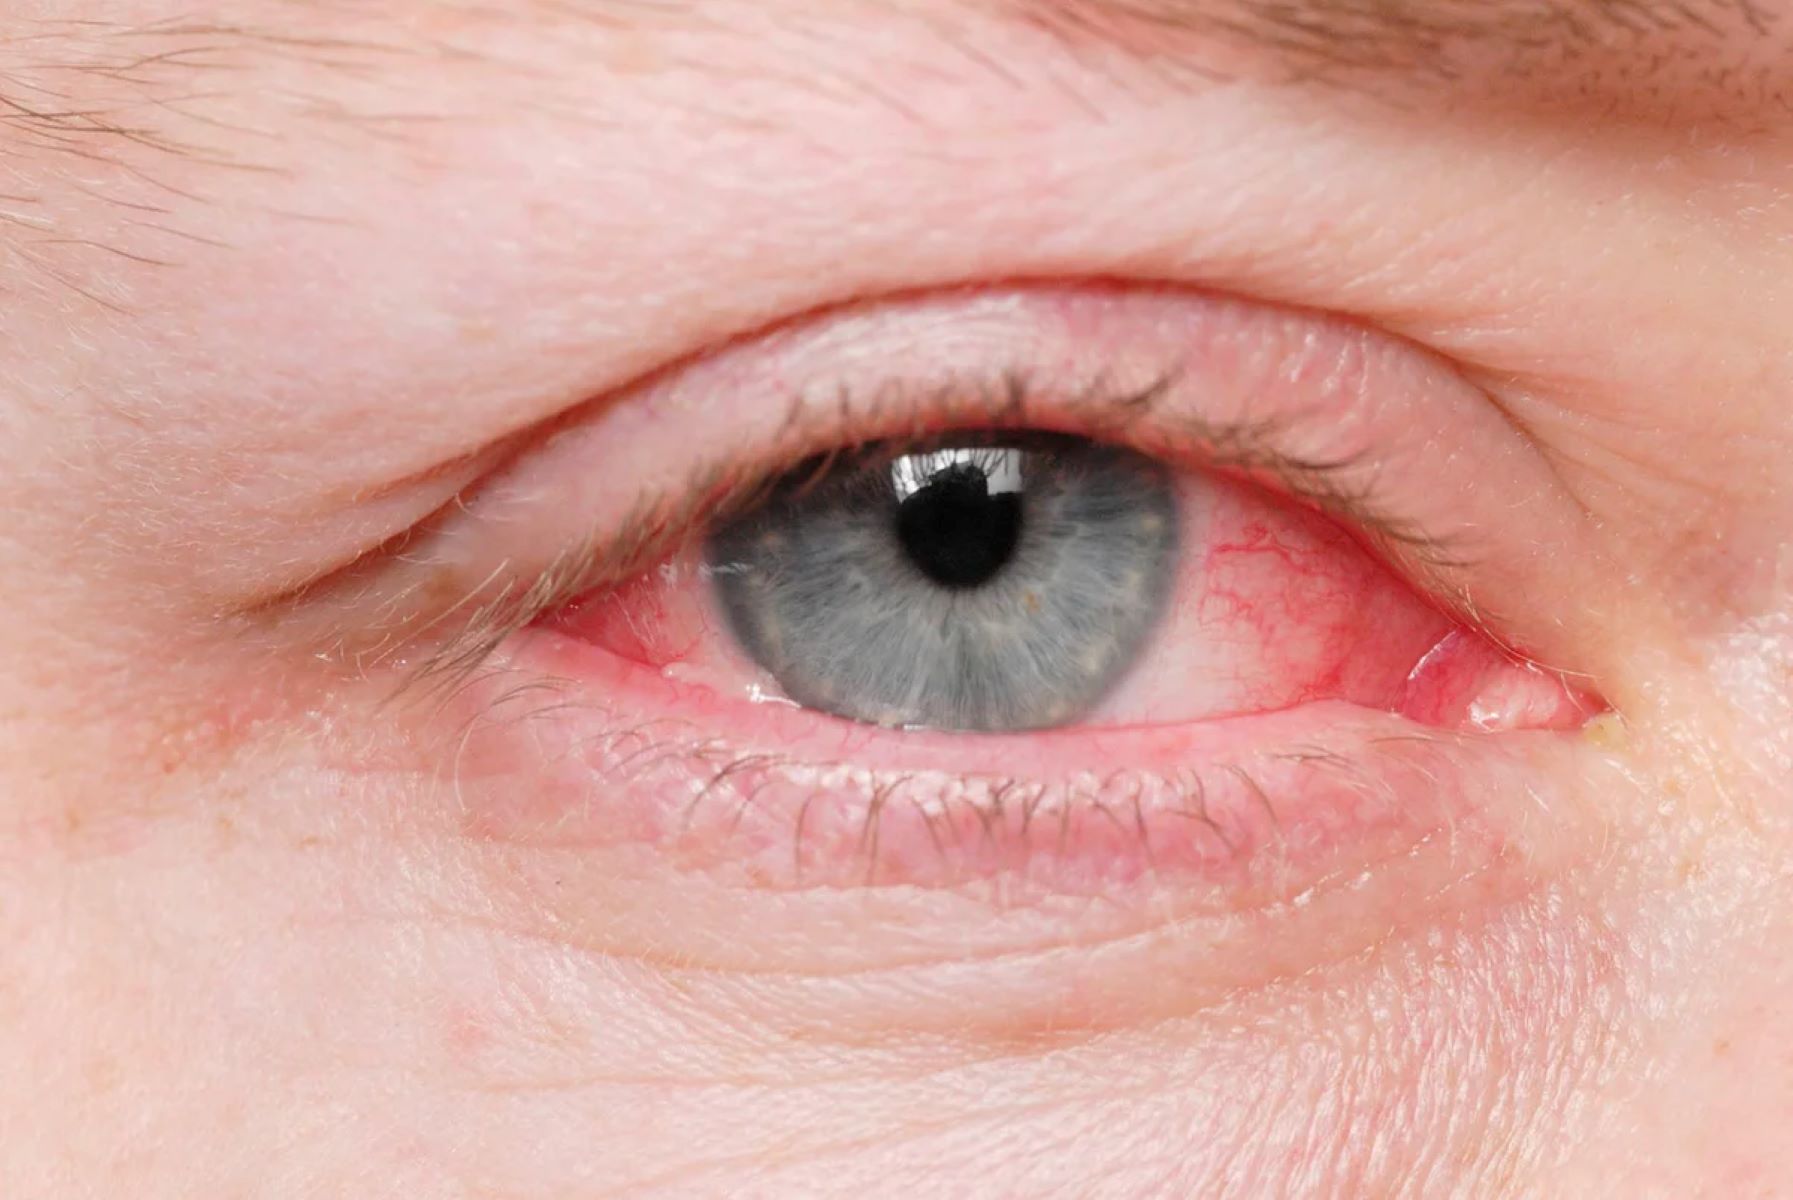 Surprising Way You Could Catch Pink Eye - You Won't Believe What Happened!